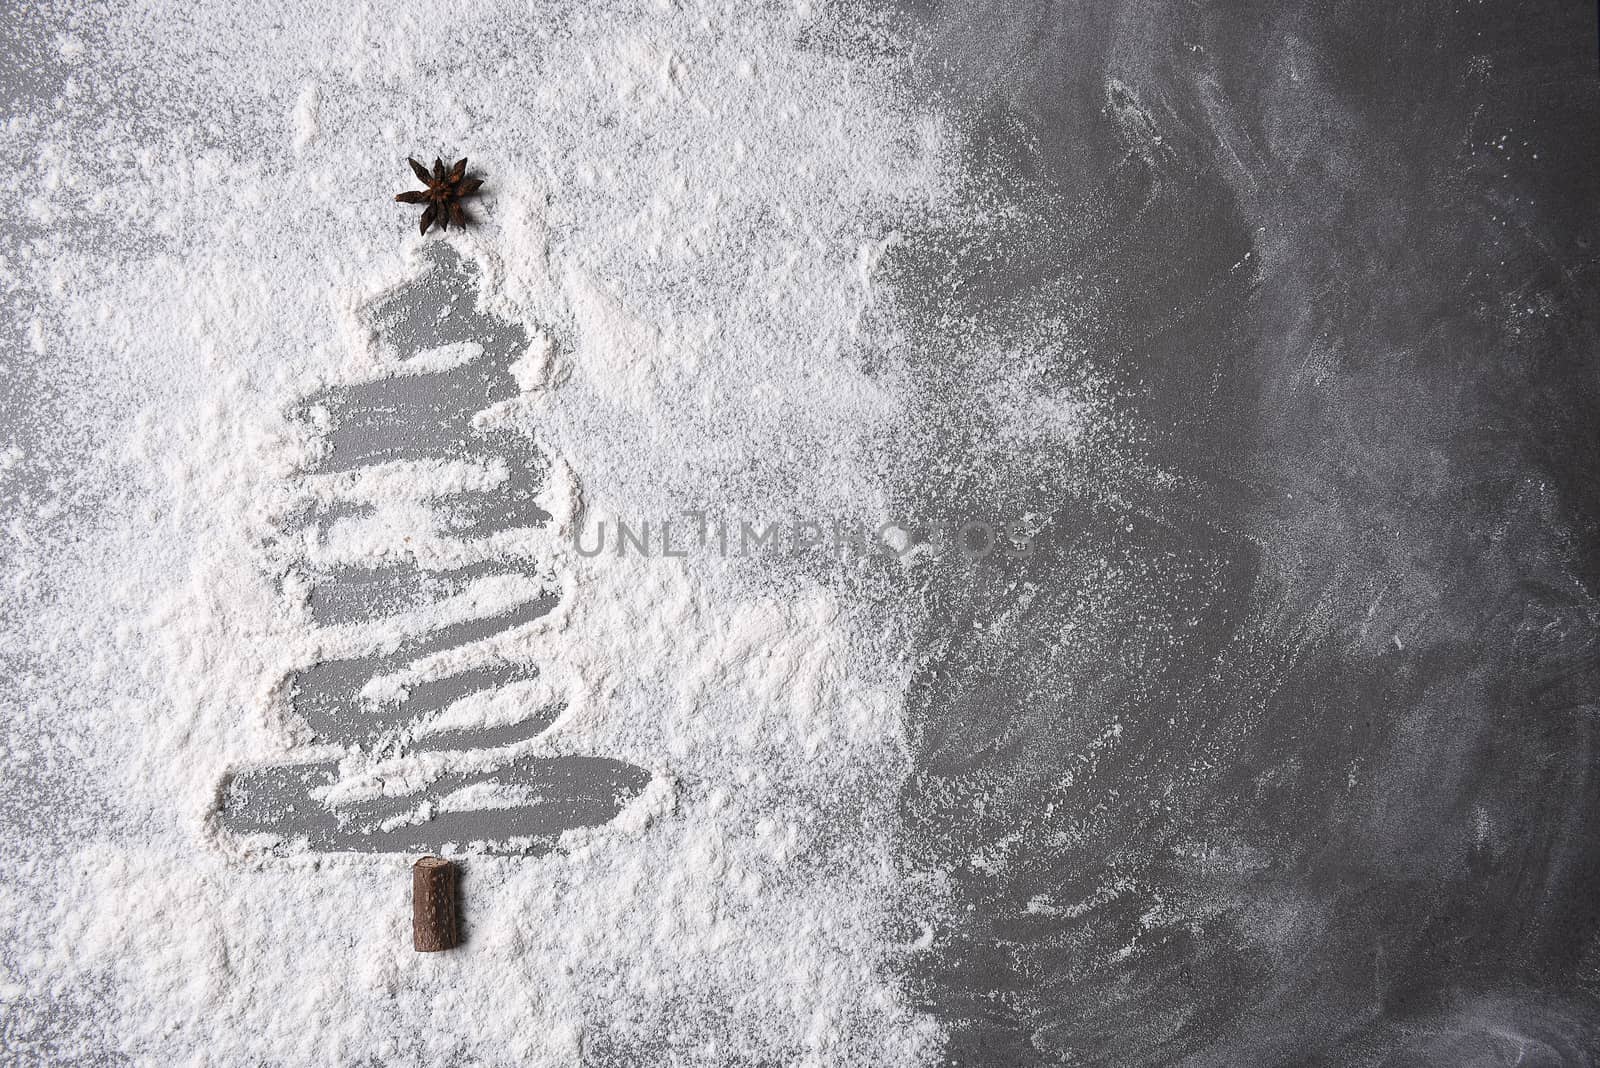 Flour on a baking sheet in a Christmas tree shape  by sCukrov